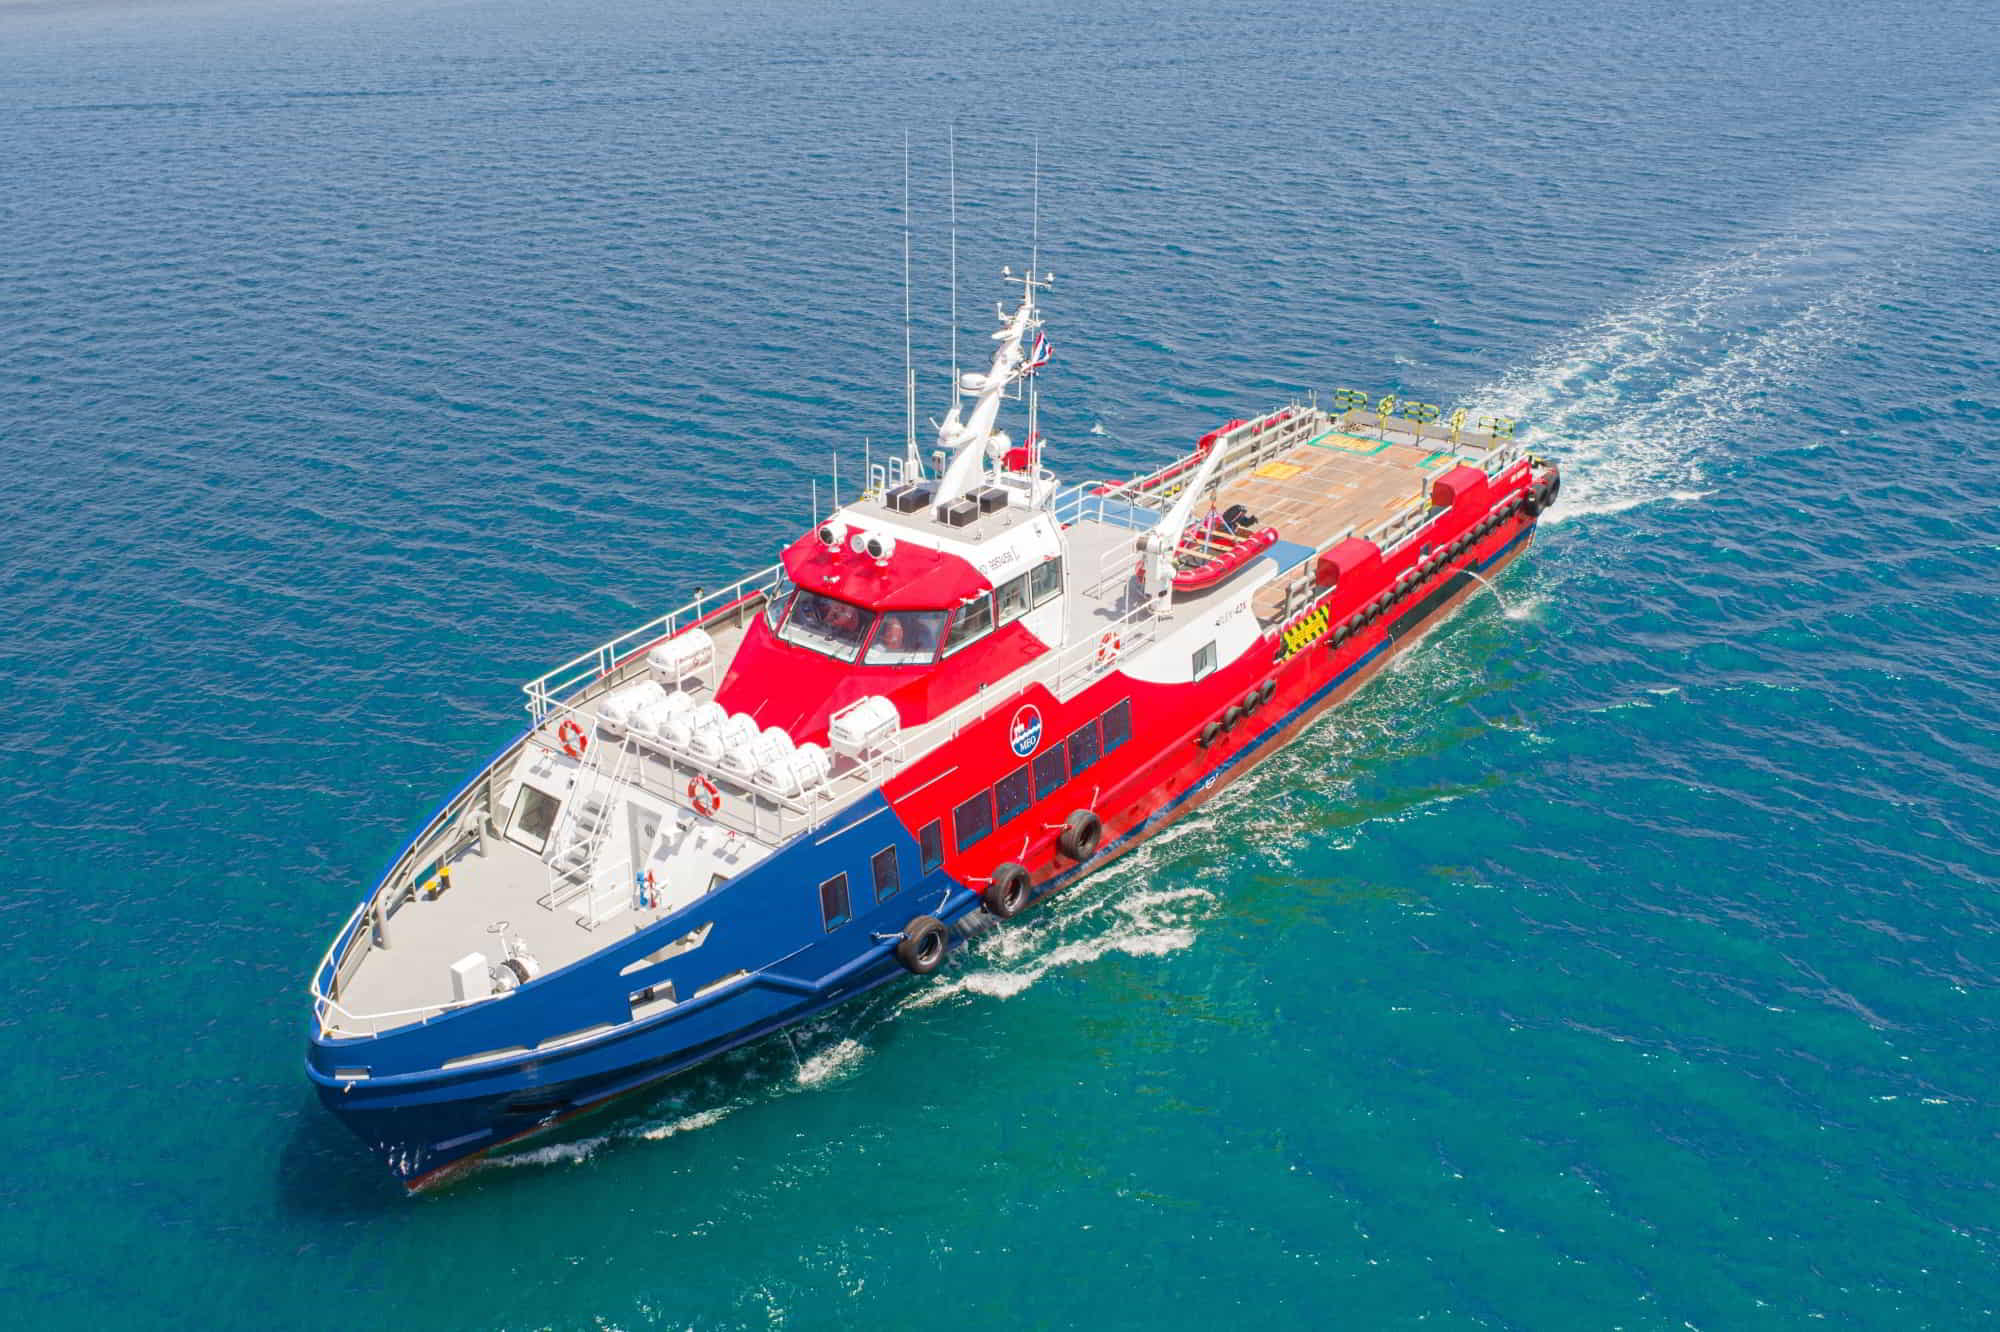 Asian vessel owner embarks on ‘fleet rejuvenation’ mission to add five brand-new crew boats